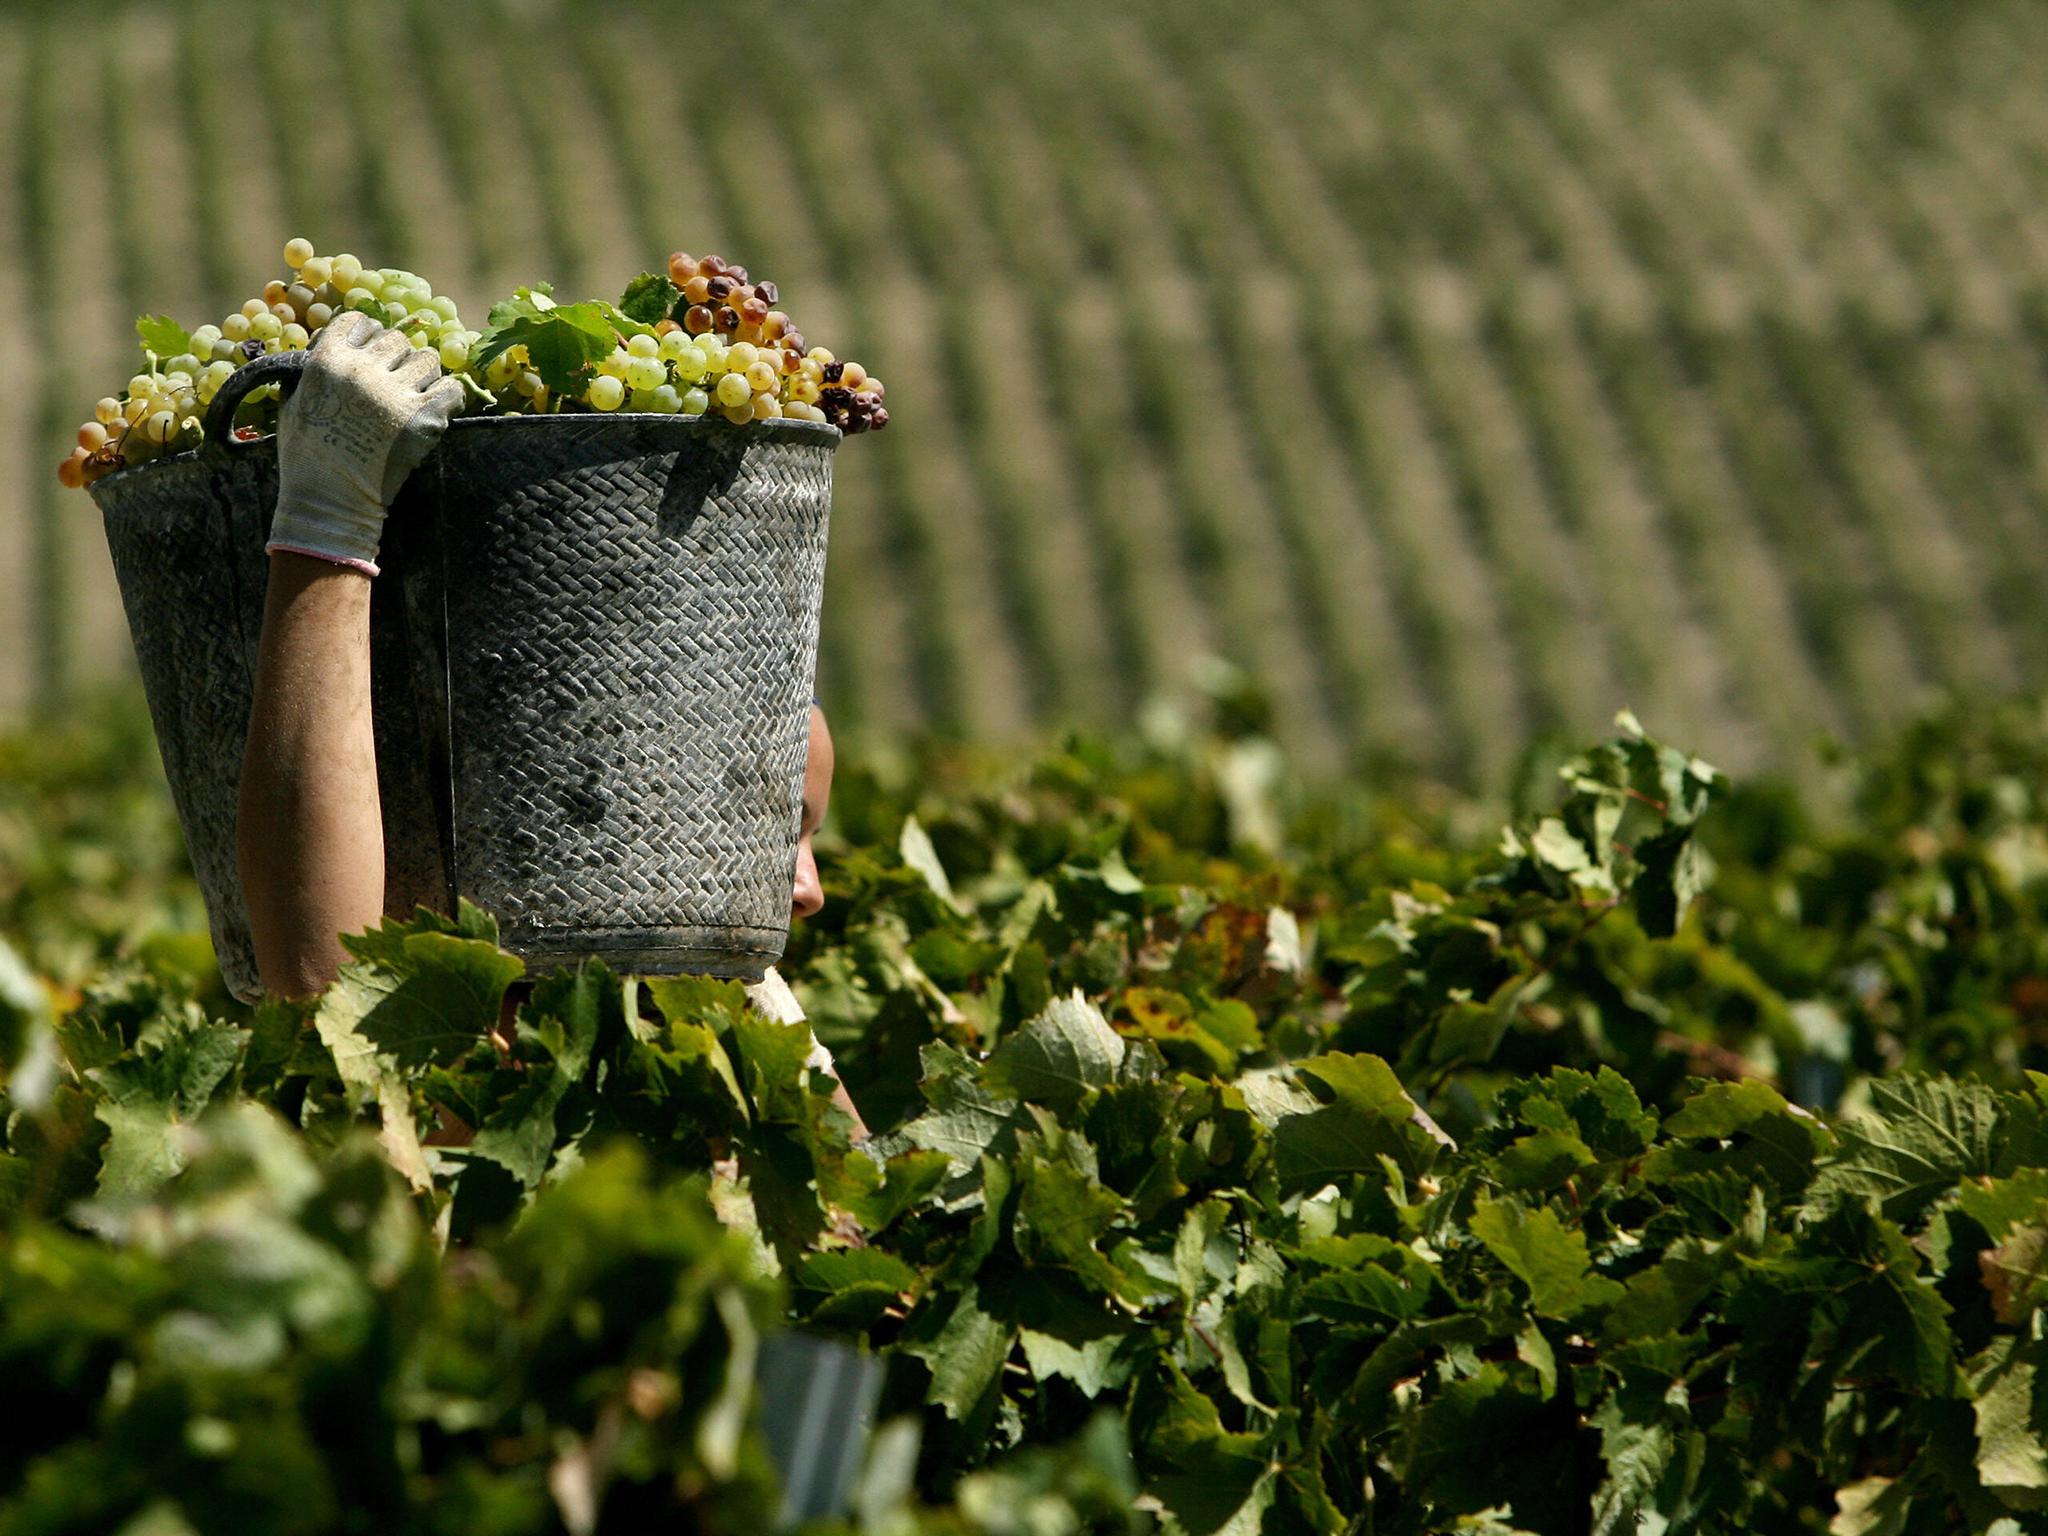 French winemakers have endured a terrible year